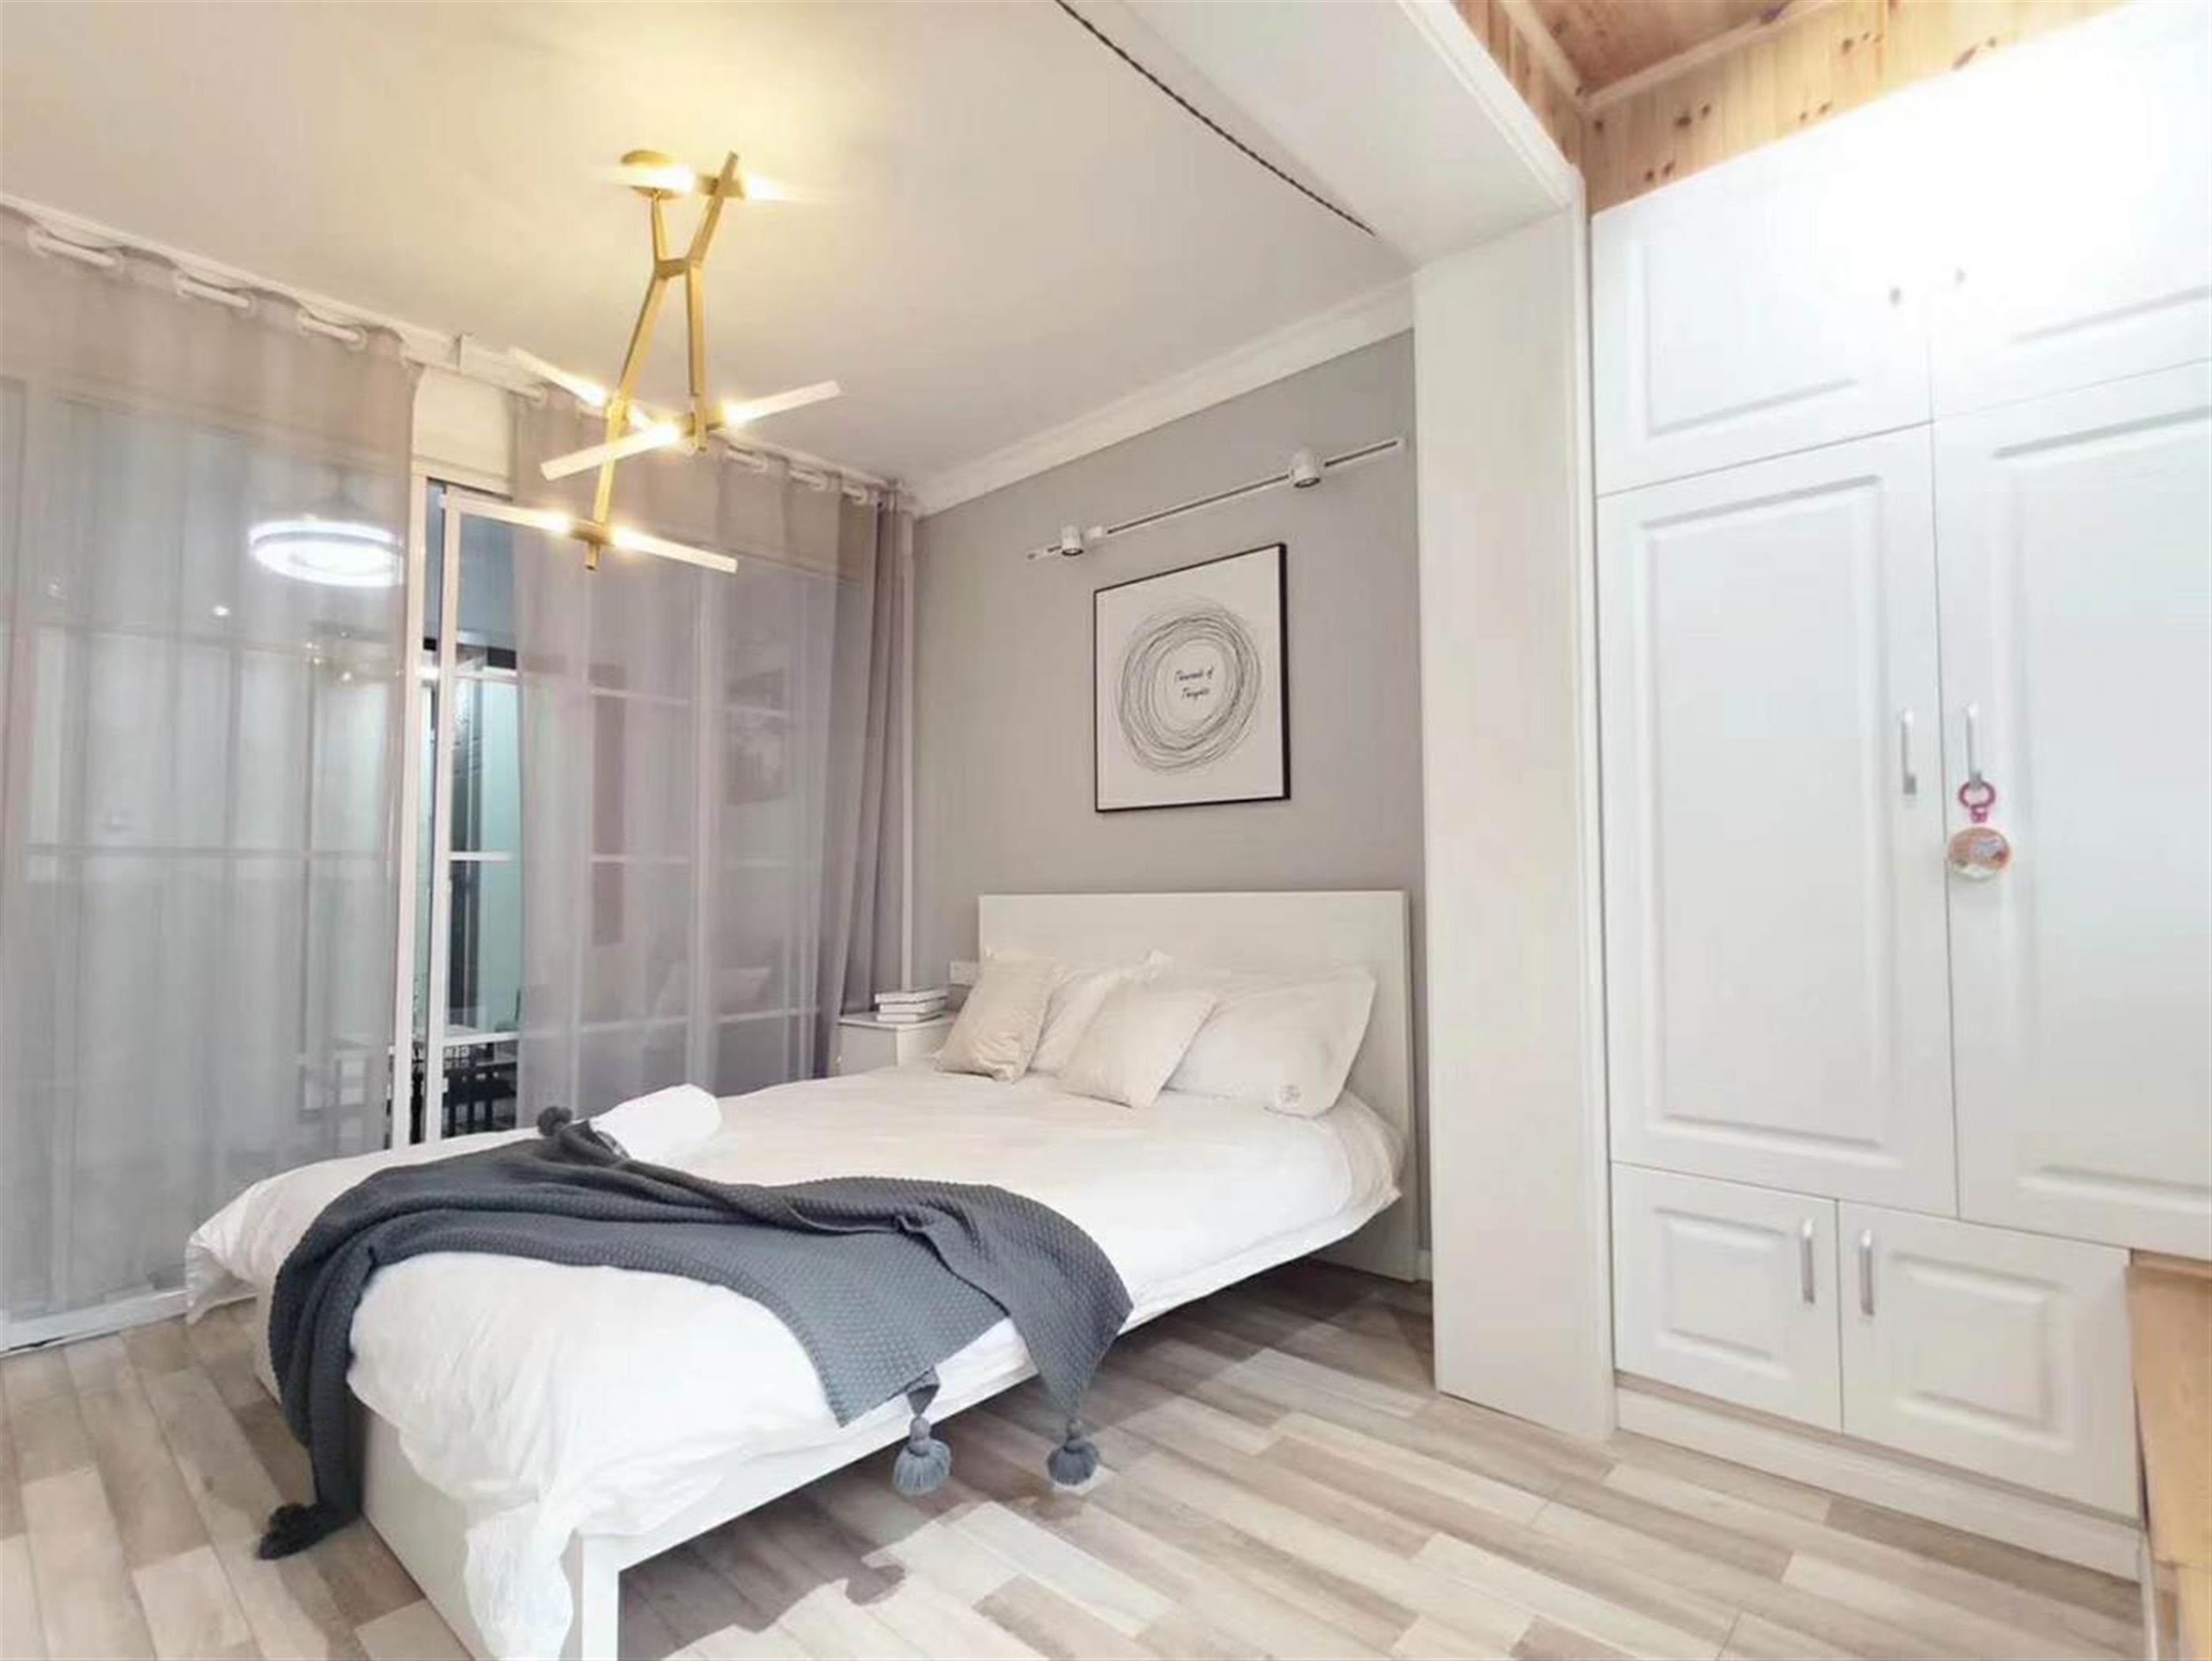 large bedroom Renovated Affordable Cozy 50sqm Xinhua Road Apt nr LN 3/4/10 for Rent in Shanghai